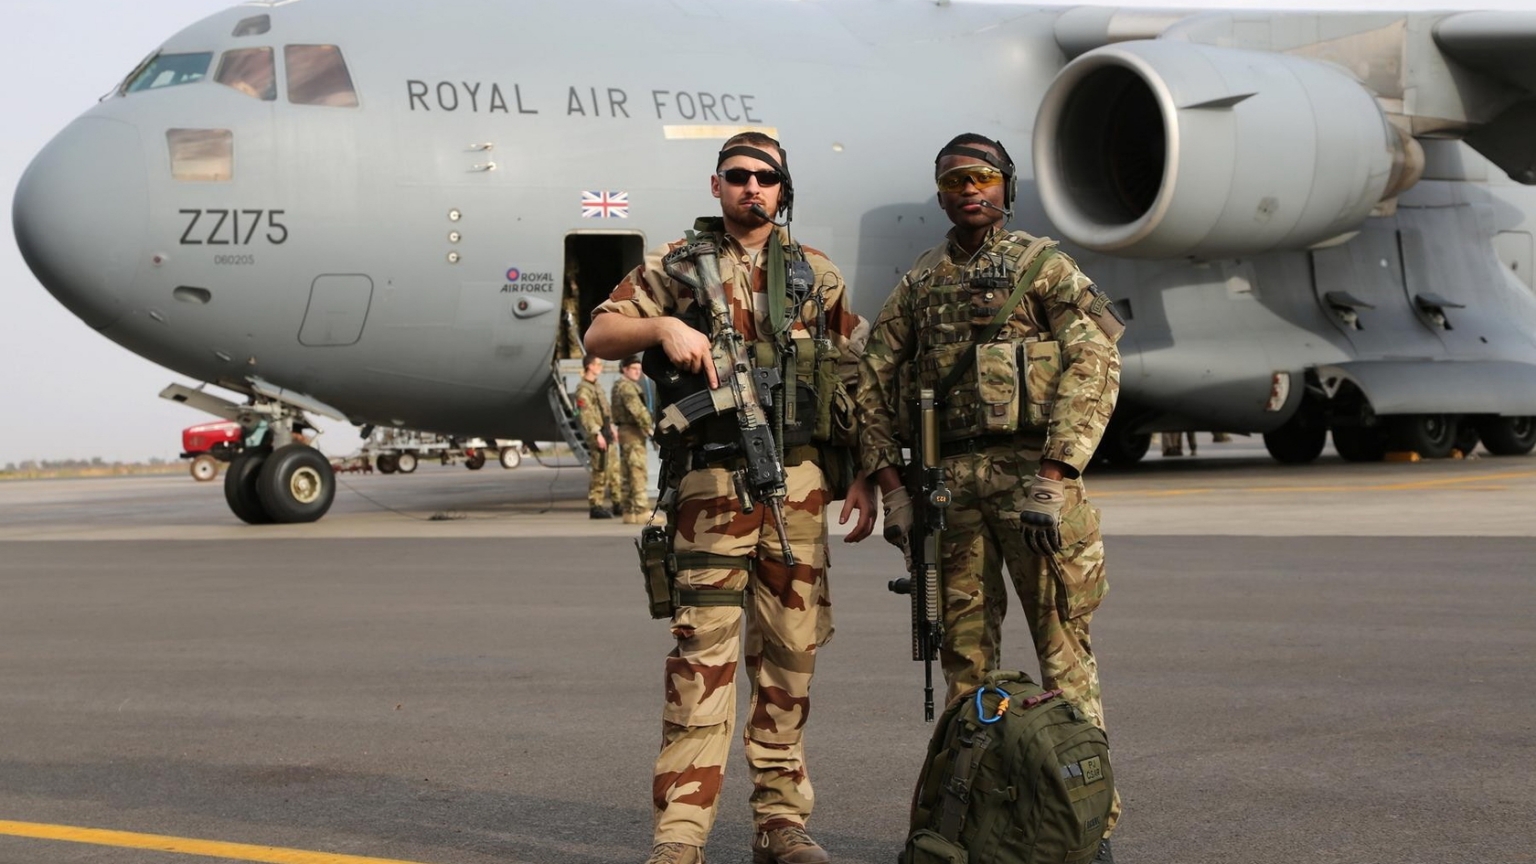 Royal Air Force for 1536 x 864 HDTV resolution